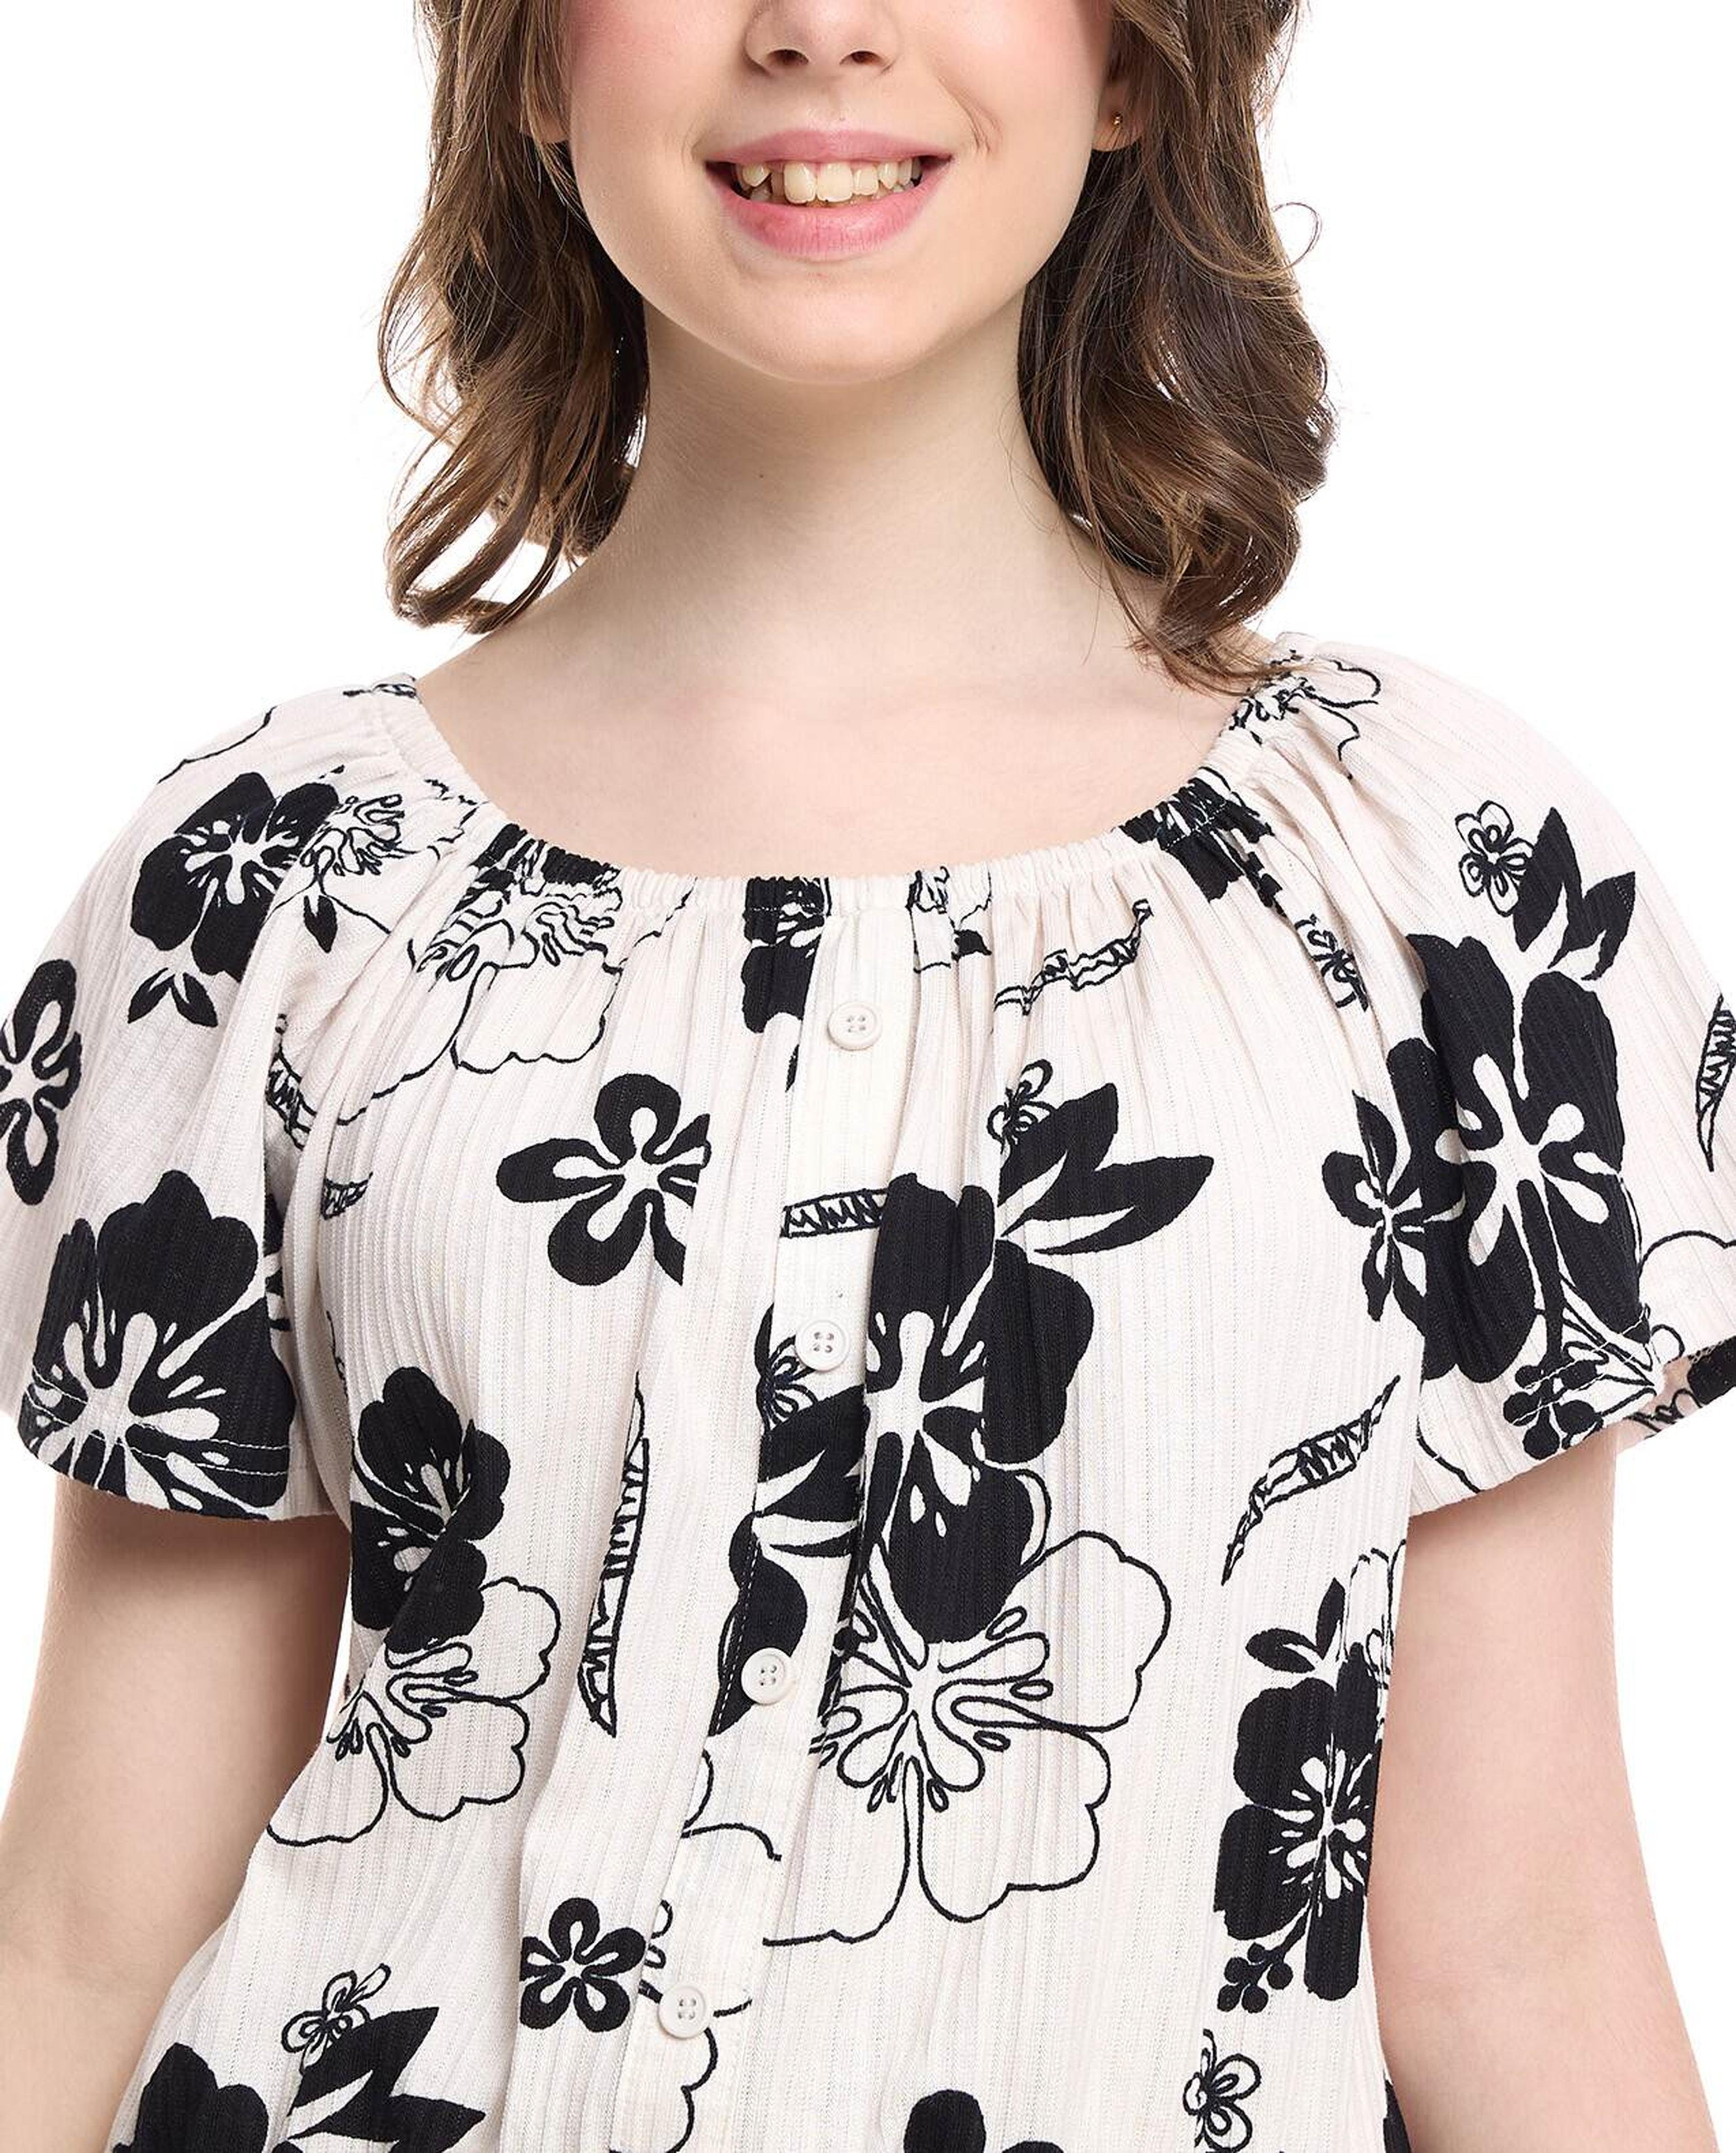 Floral Printed Top with Round Neck and Short Sleeves